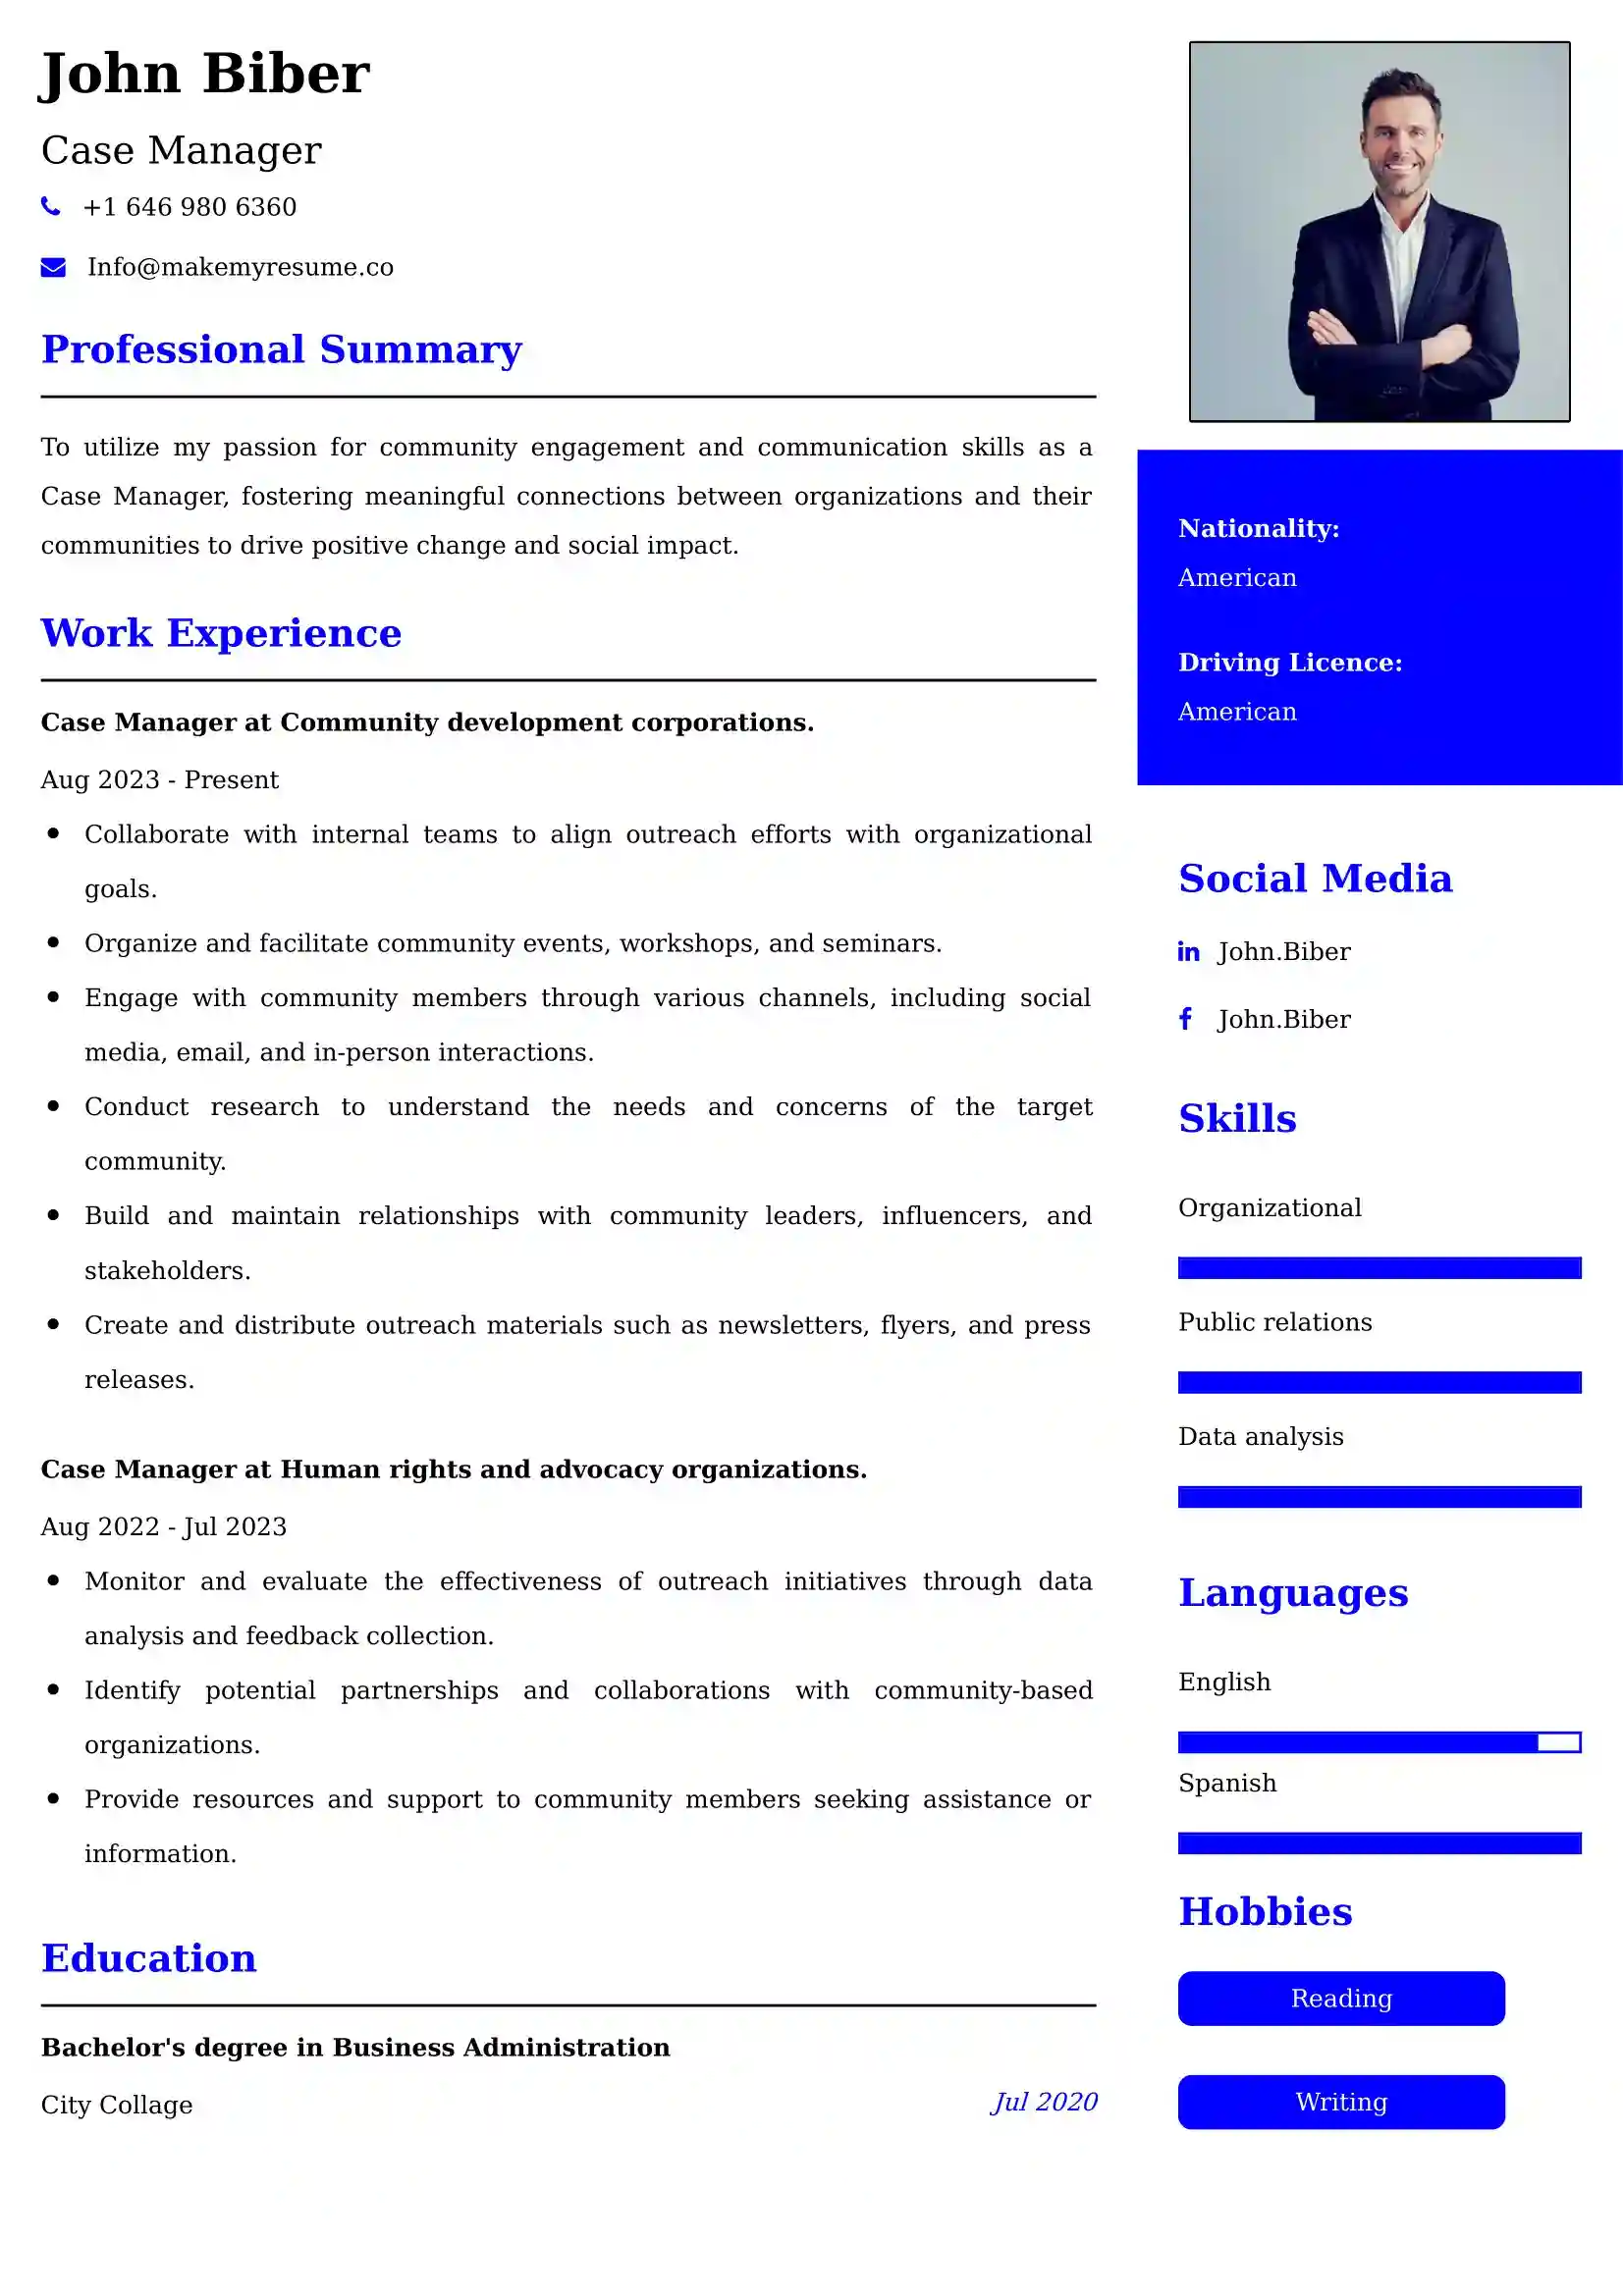 Case Manager Resume Examples - Brazilian Format, Latest Template